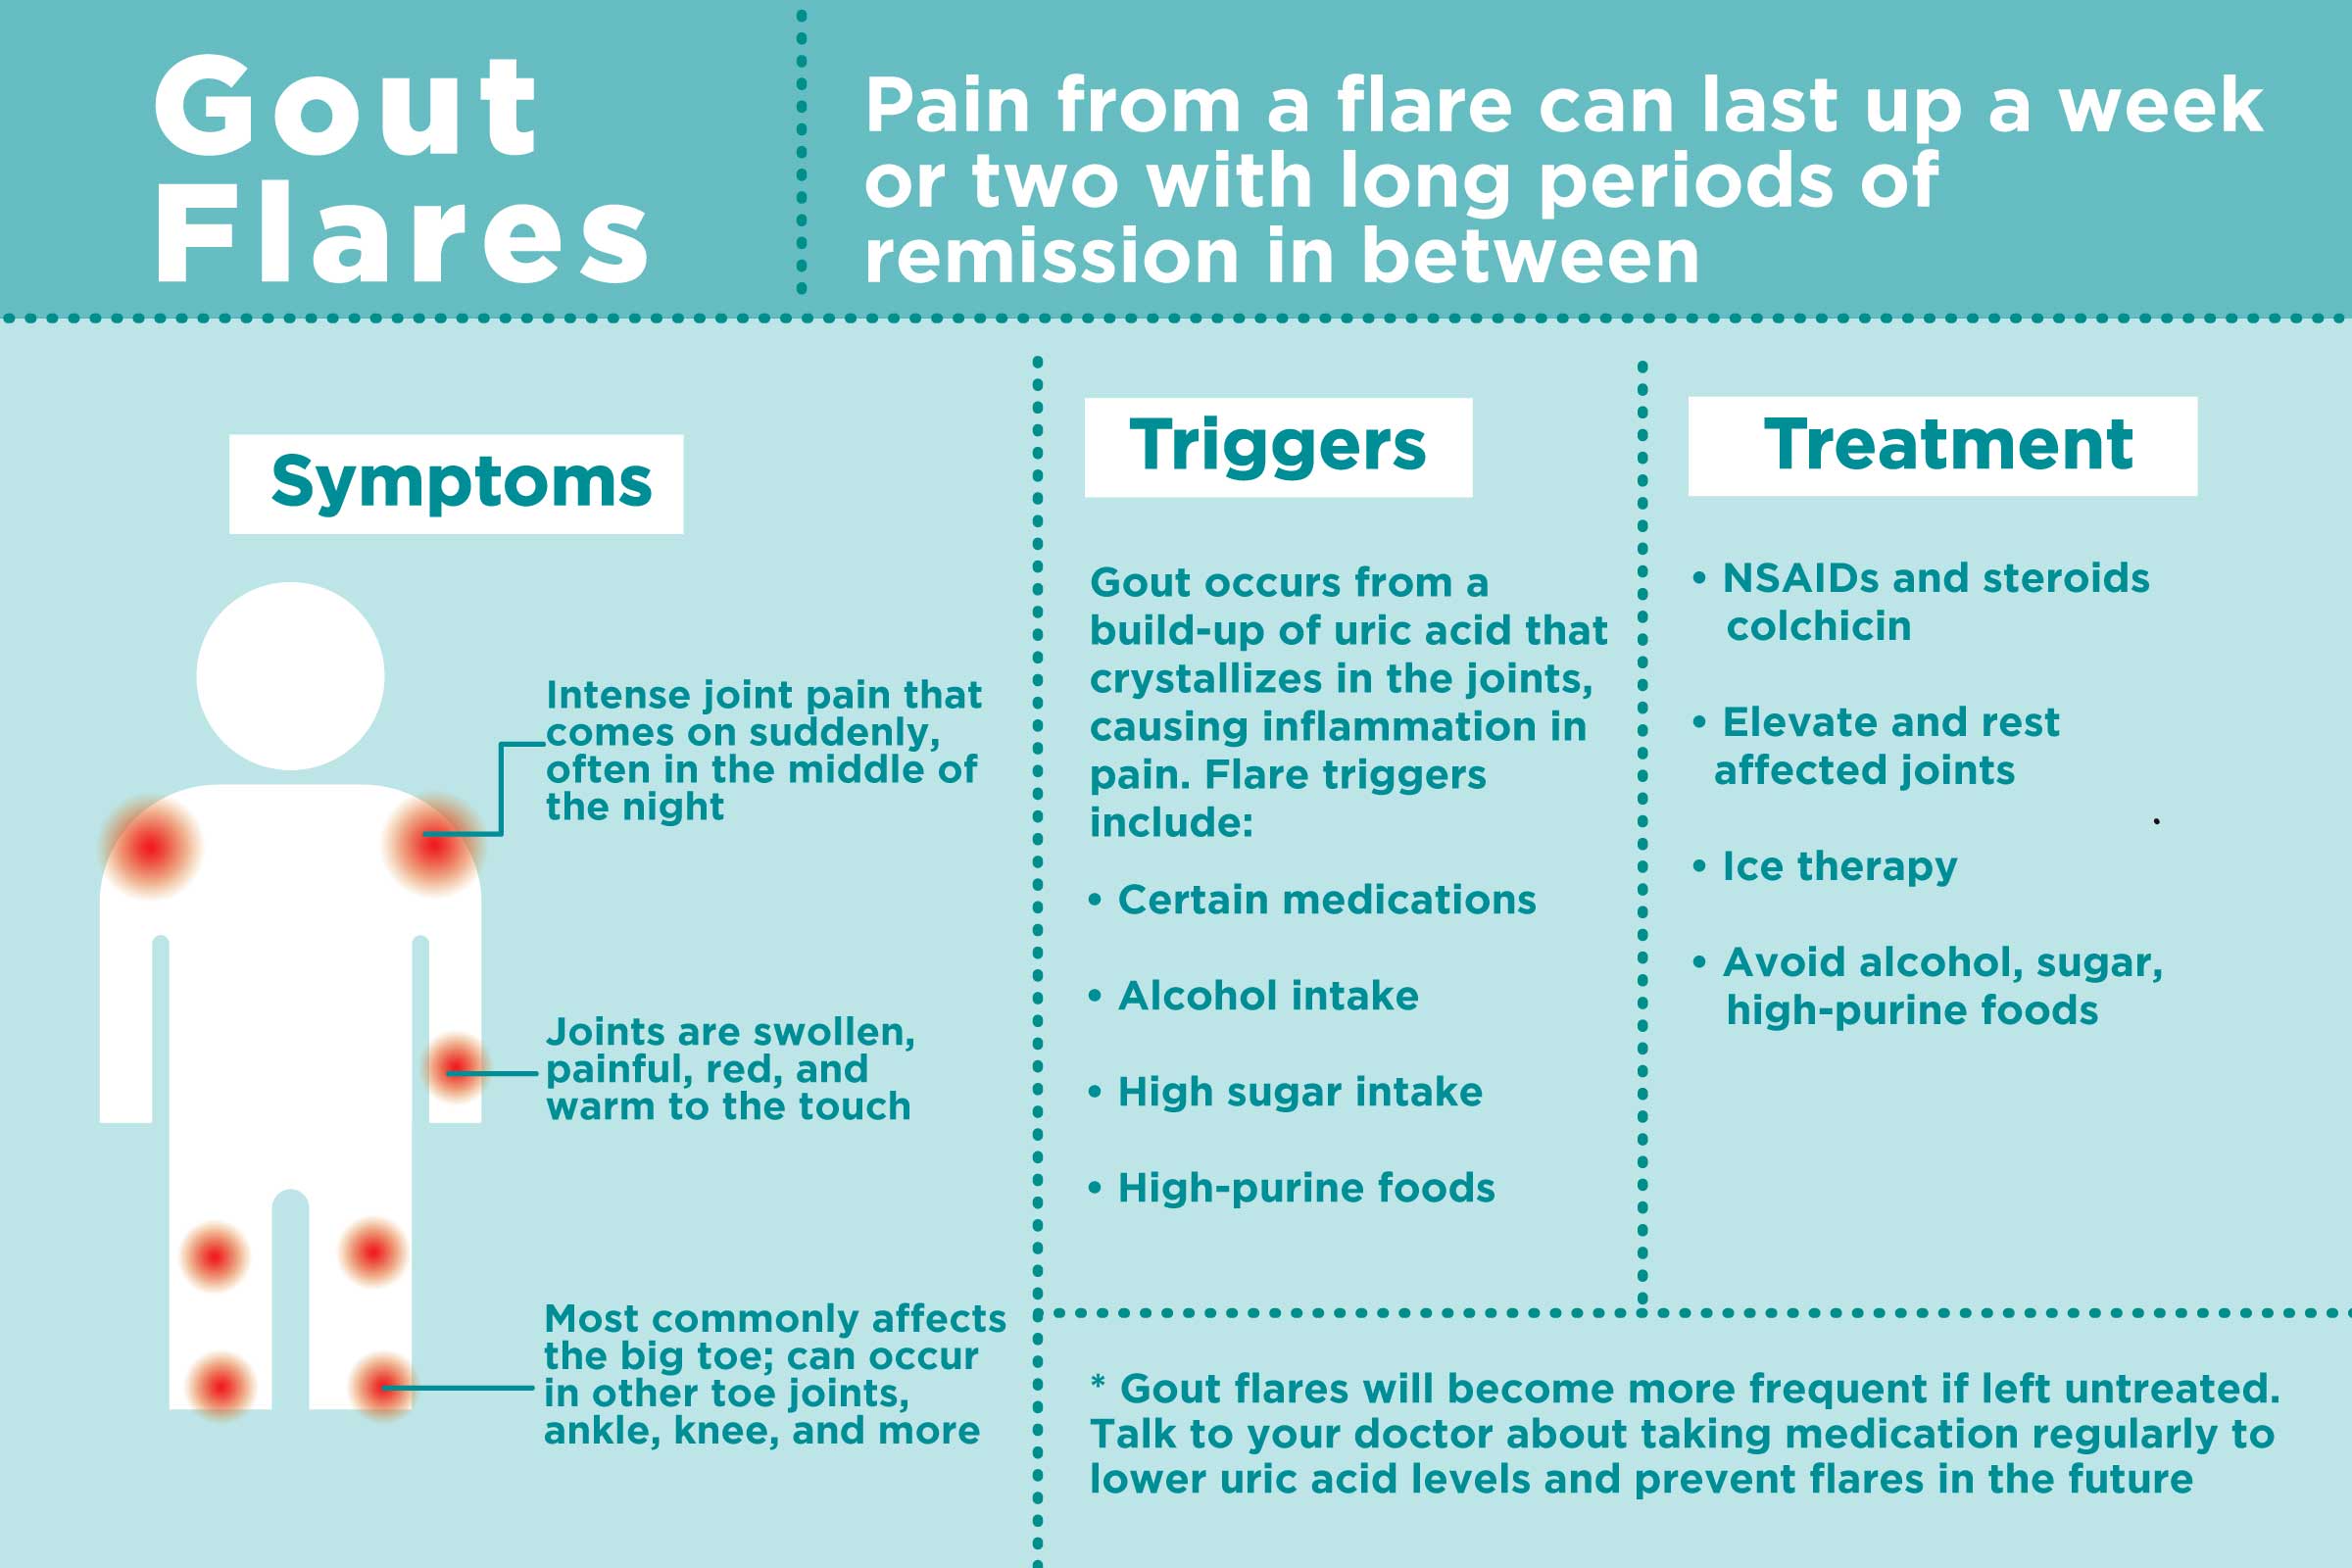 Gout Flares How to Treat Them and Prevent Them in the Future